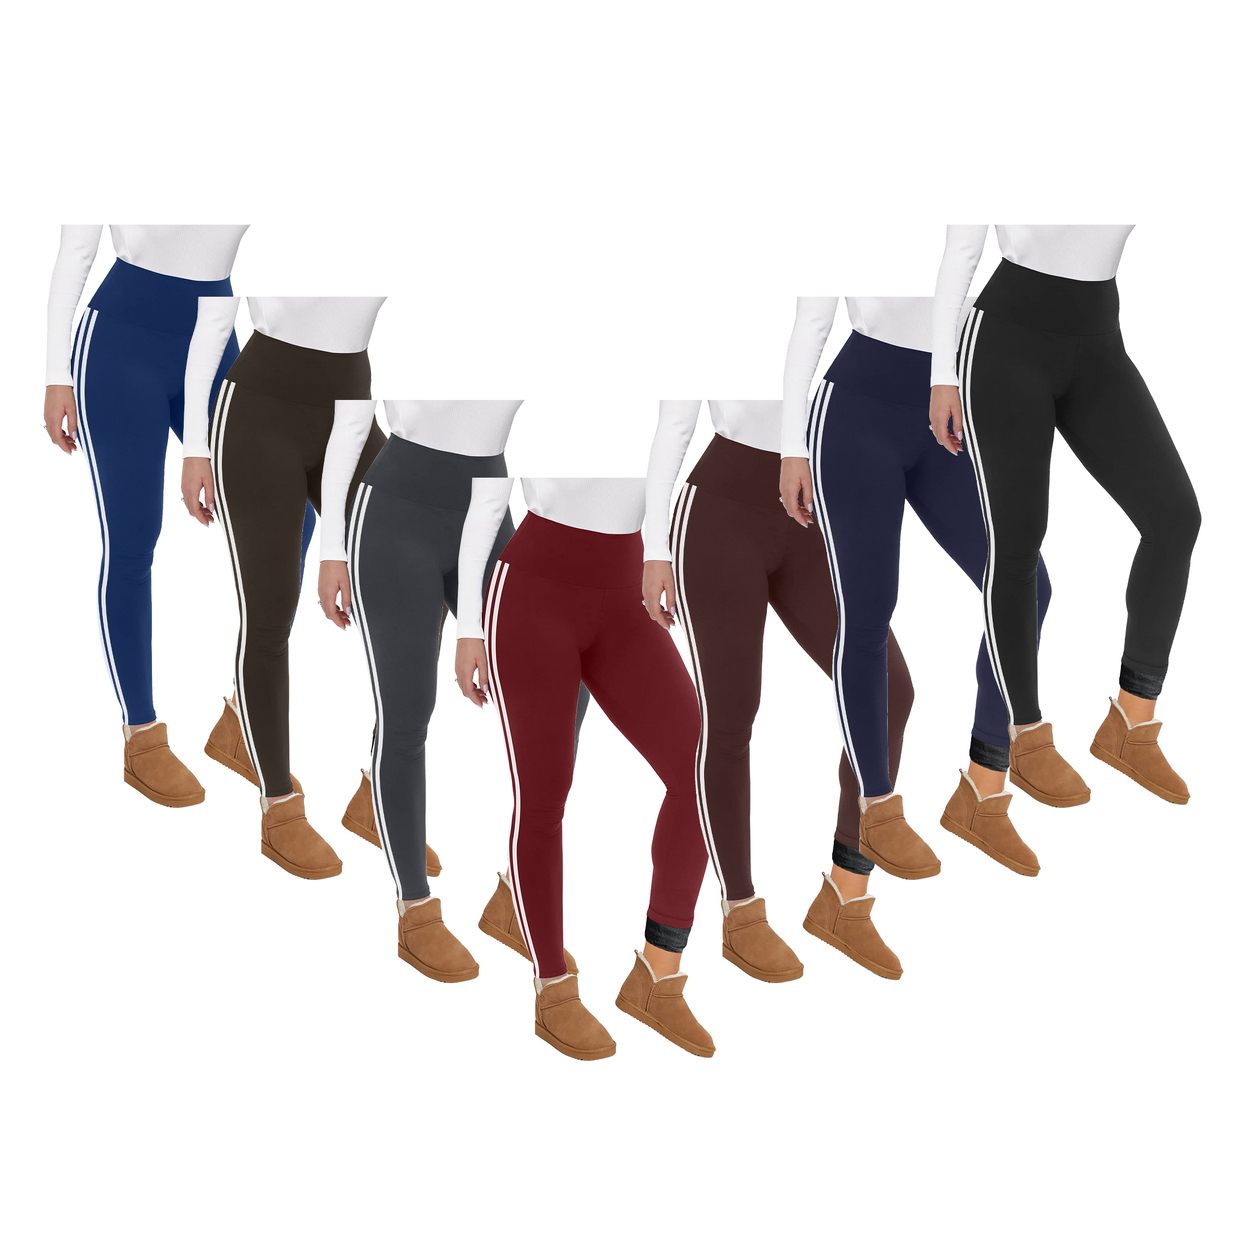 Multi-Pack: Women's Ultra Soft Winter Warm Cozy Striped Fur Lined Yoga Leggings - 1-pack, Assorted, Small